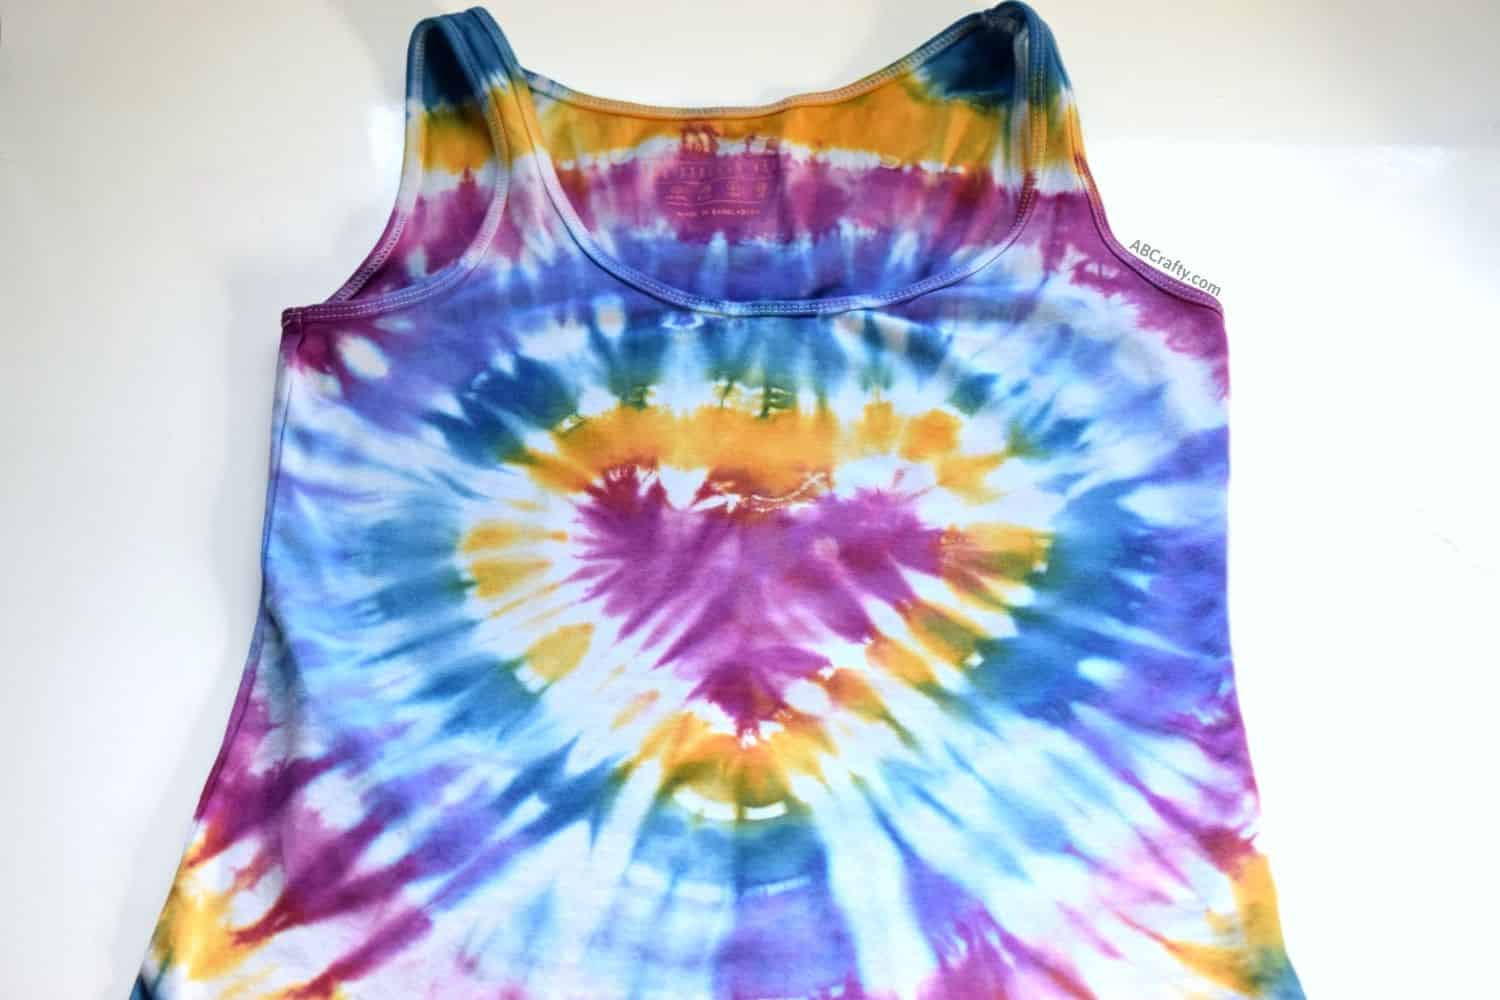 How to tie dye spirals on fabric - SewGuide